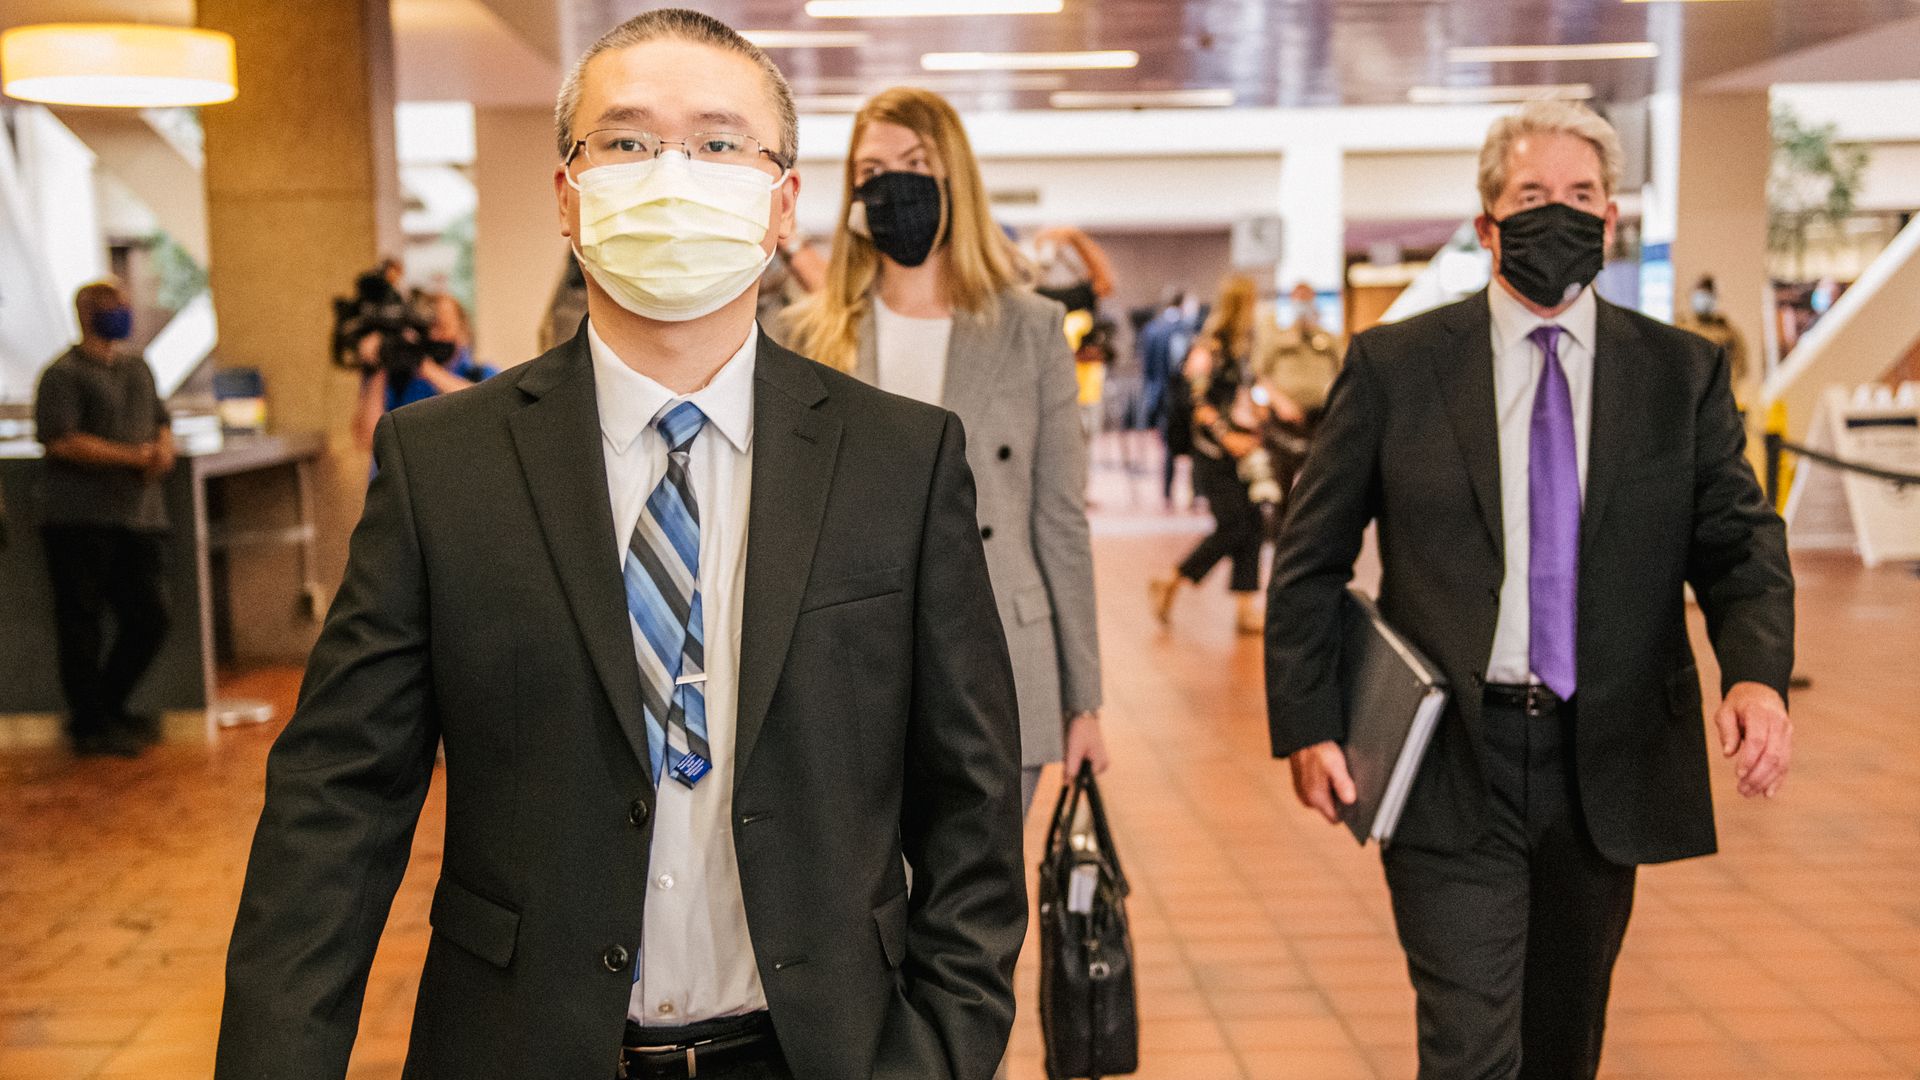 tou thao walks to court wearing a black suit and a blue striped tie and a mask and glasses. his lawyer and a woman, both in suits and a mask, walk behind him